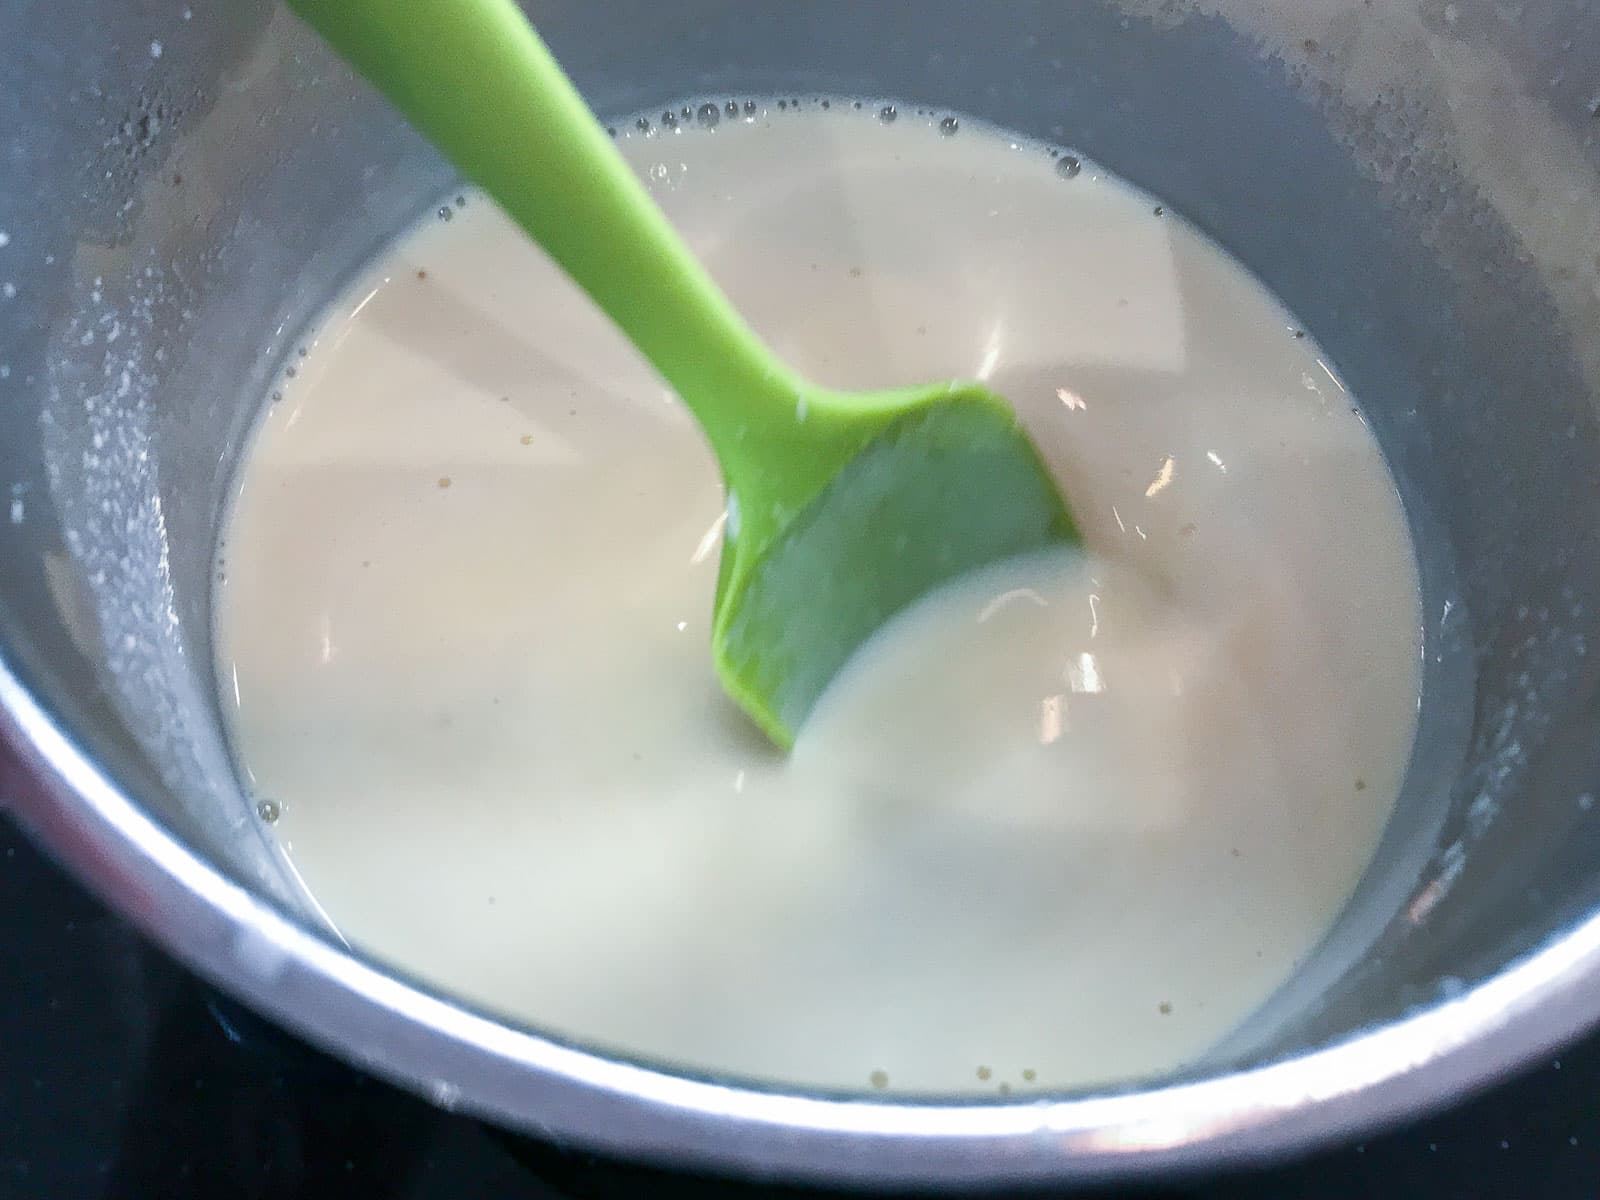 A homemade custard in a metal bowl before being thickened over heat.